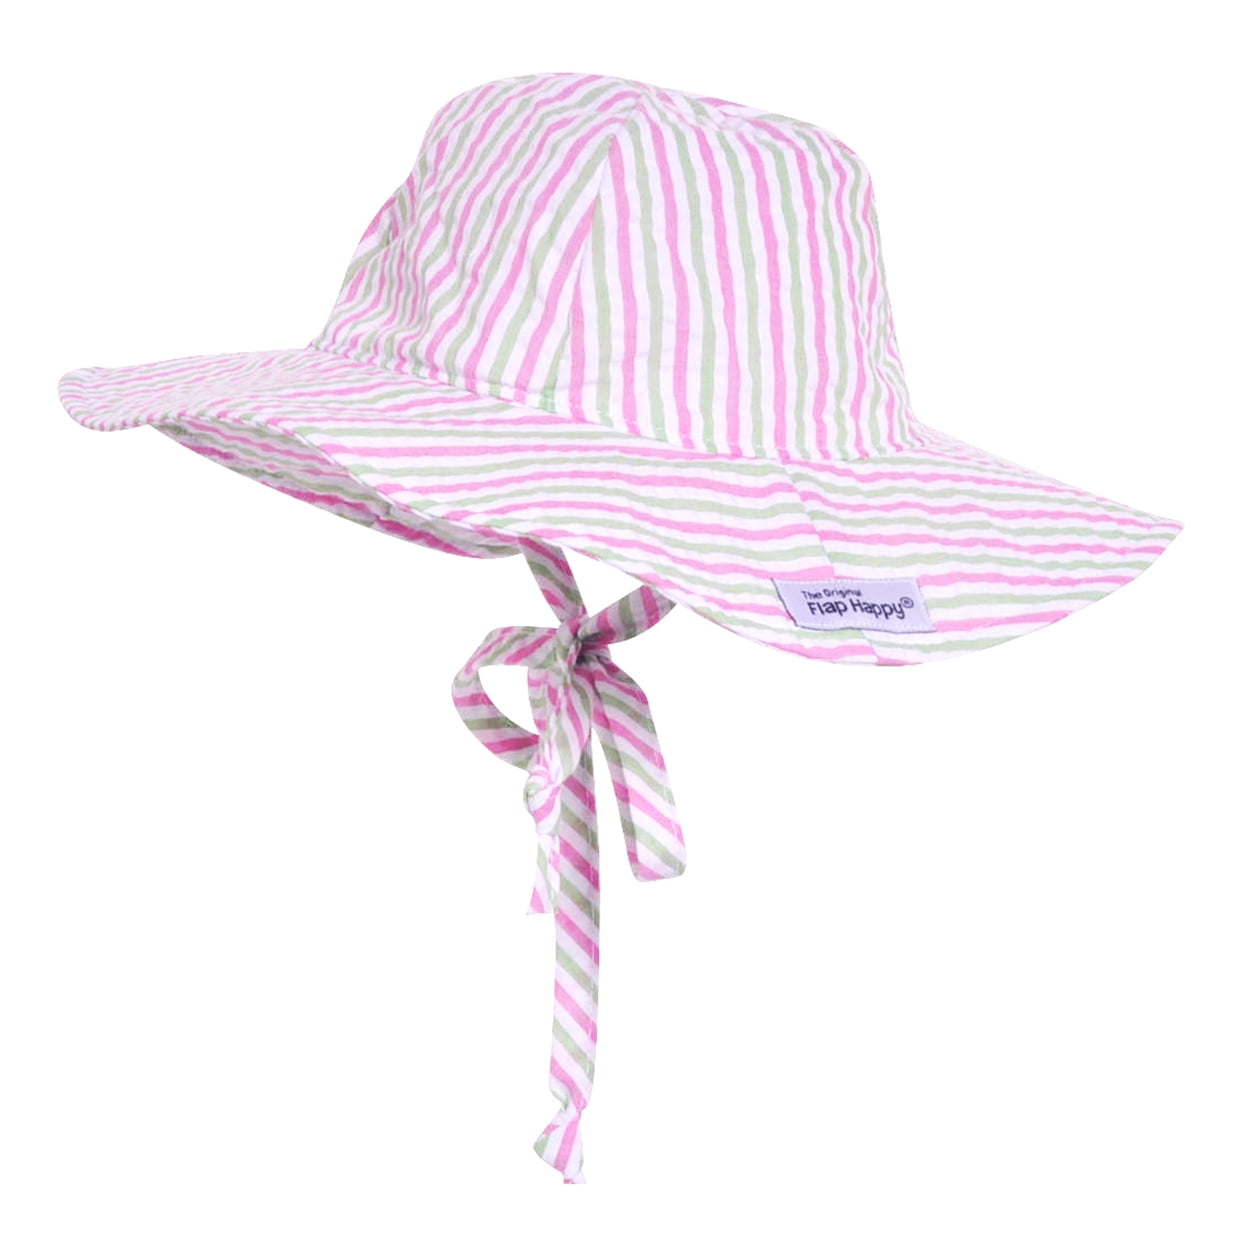 Azo-free dye Flap Happy Baby and Childrens Swim Flap Hat UPF 50+ Highest Certified UV Sun Protection Floats on Water 